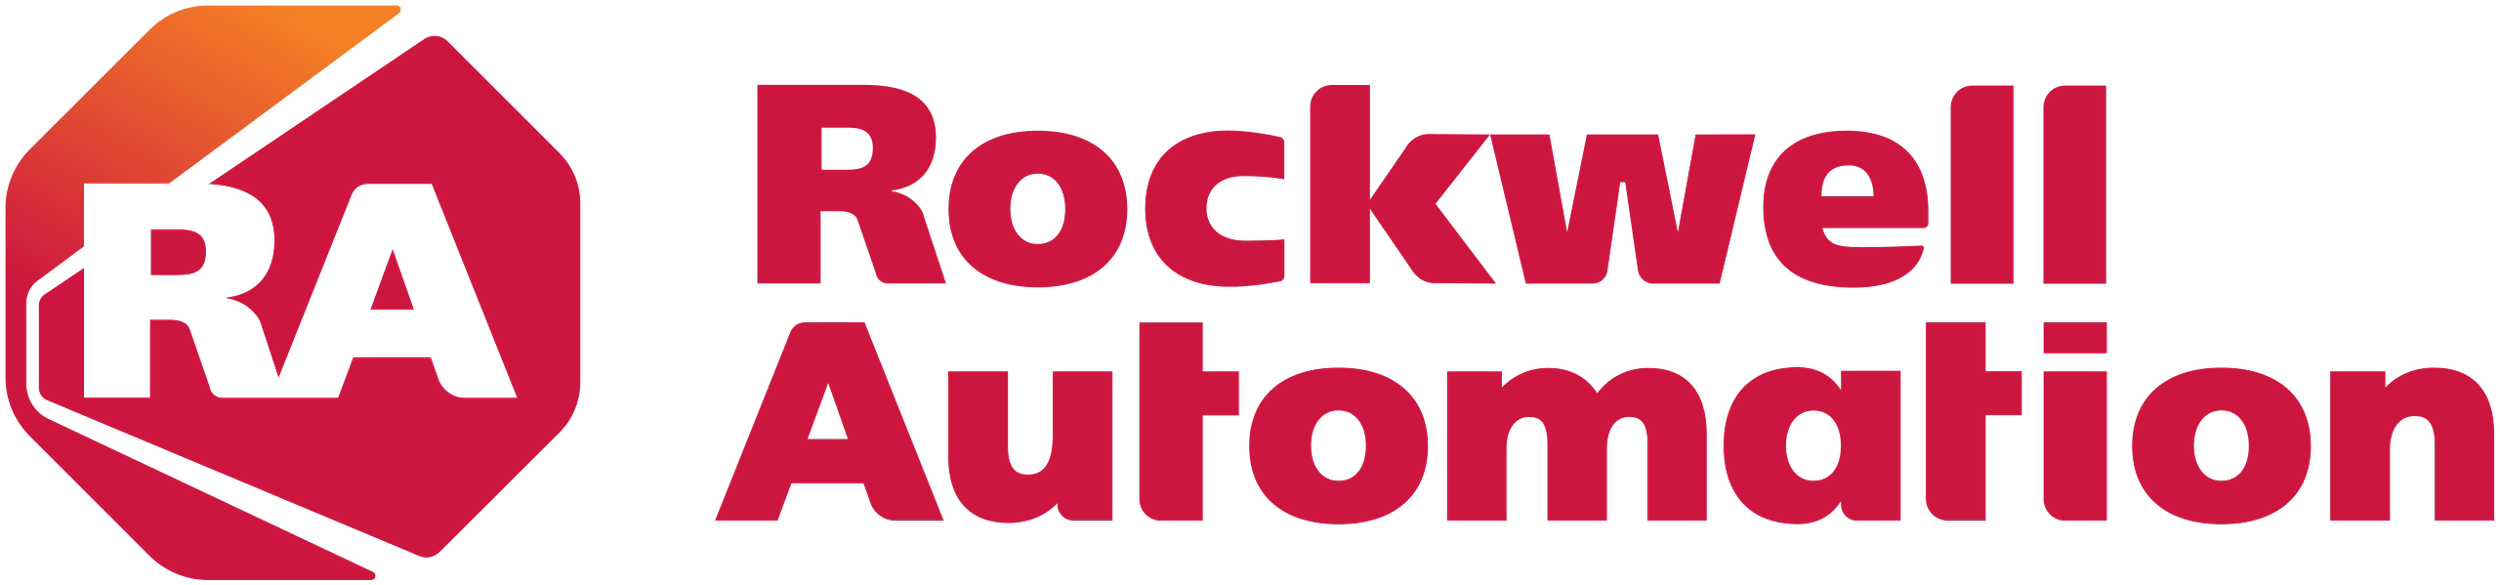 Rockwell_Automation_logo_(2019).svg.png